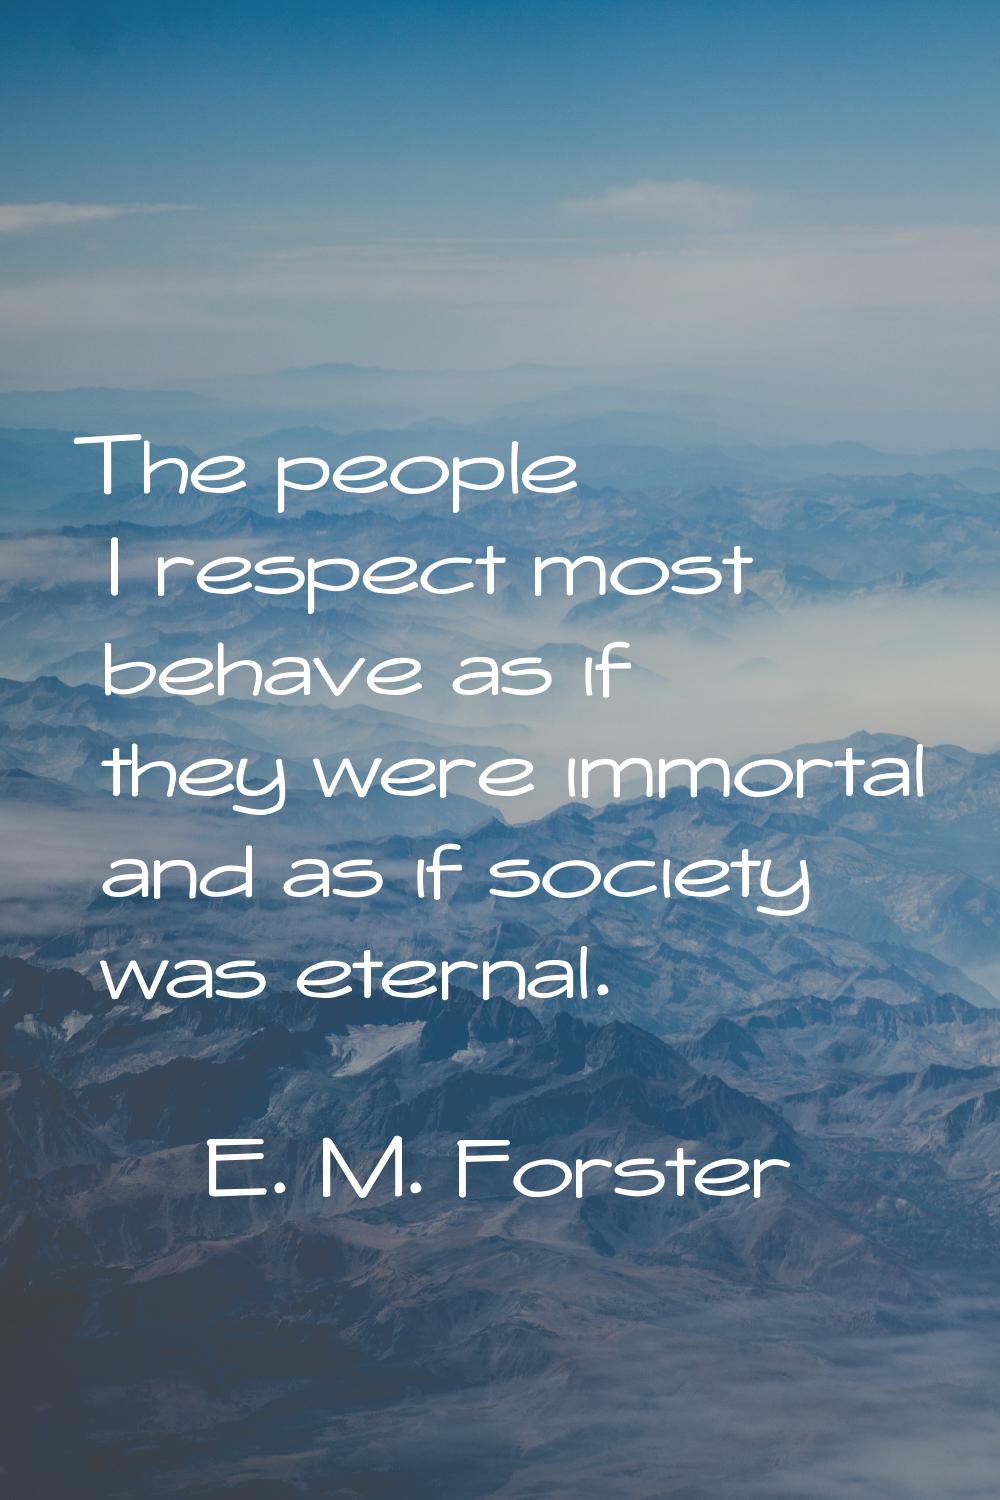 The people I respect most behave as if they were immortal and as if society was eternal.